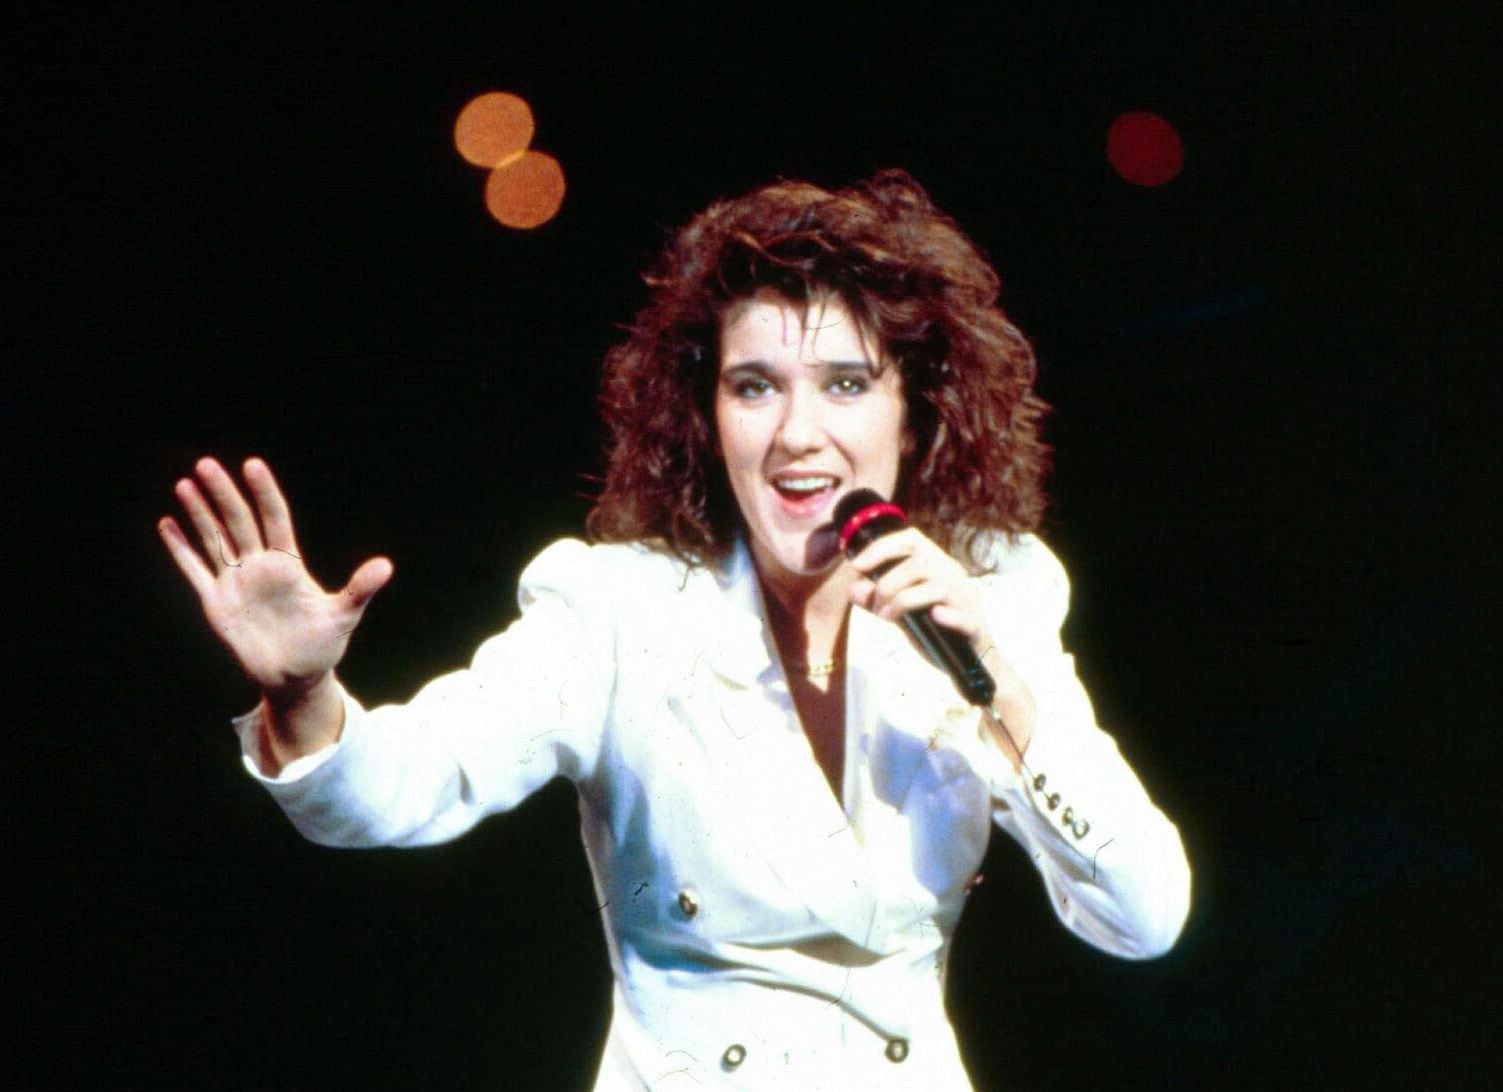 The 1980s Singer With a Voice That Rivalled Celine Dion's